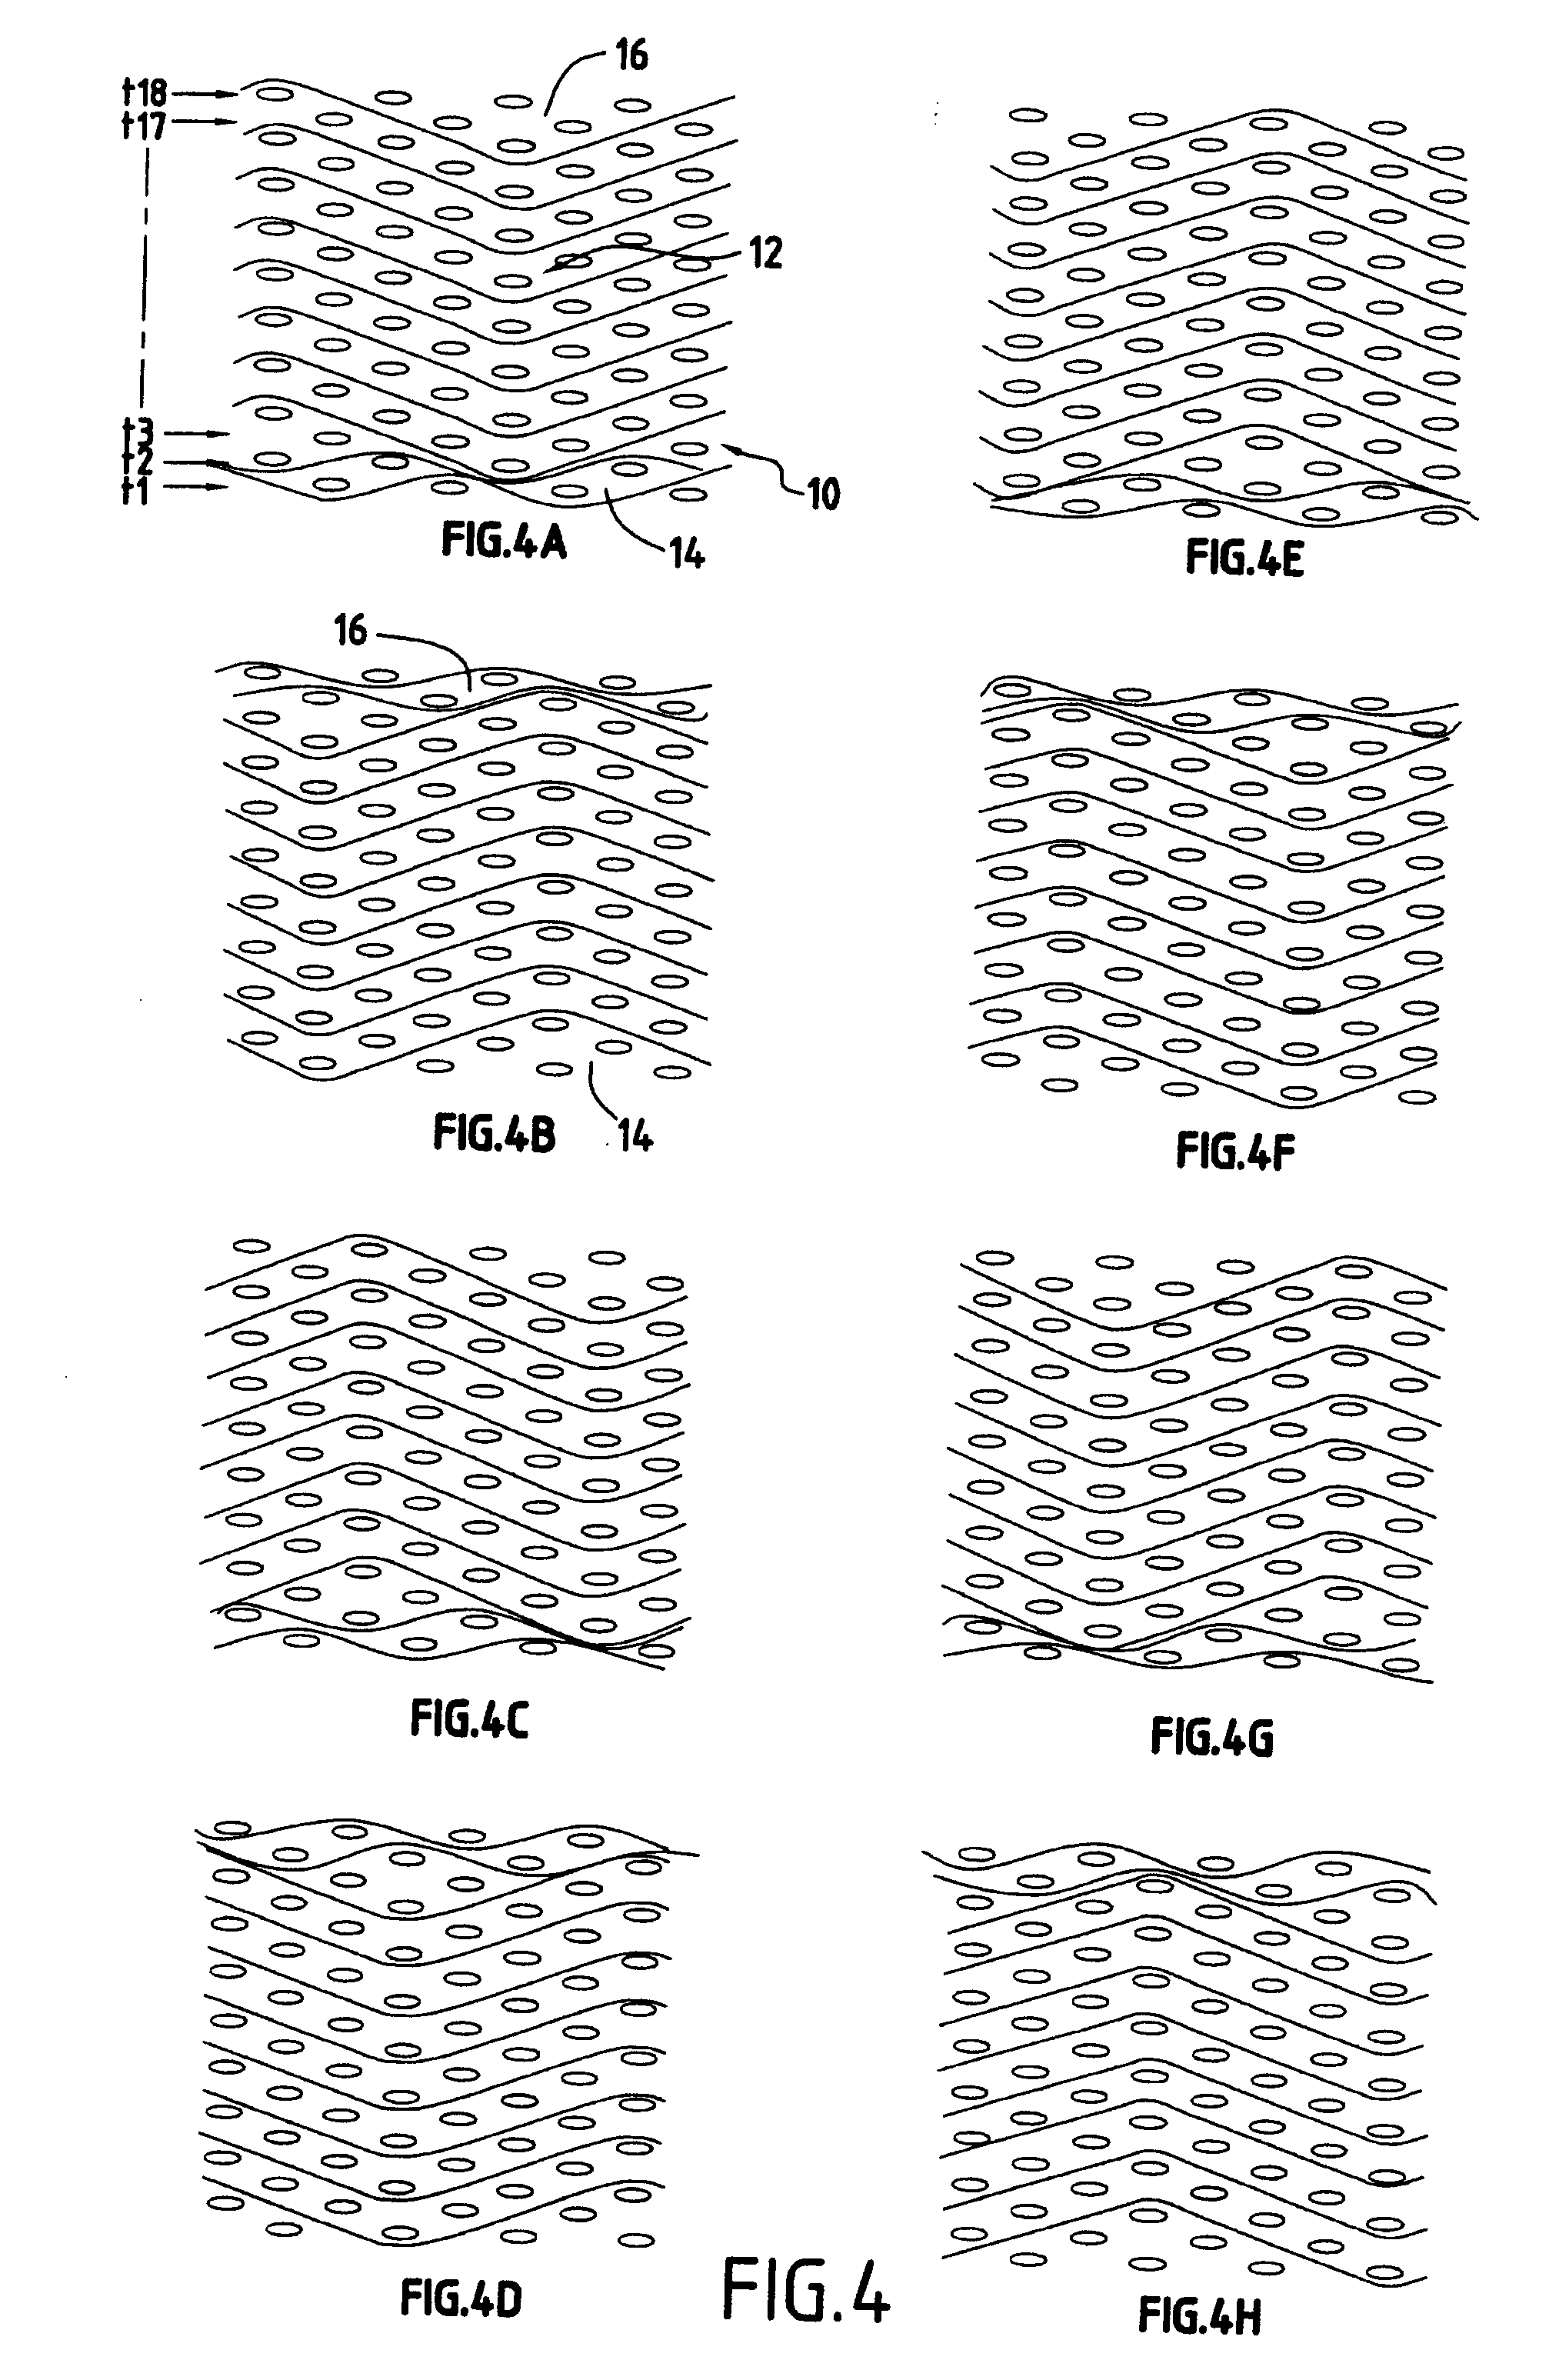 Reinforcing fibrous structure for a composite material and a part containing said structure